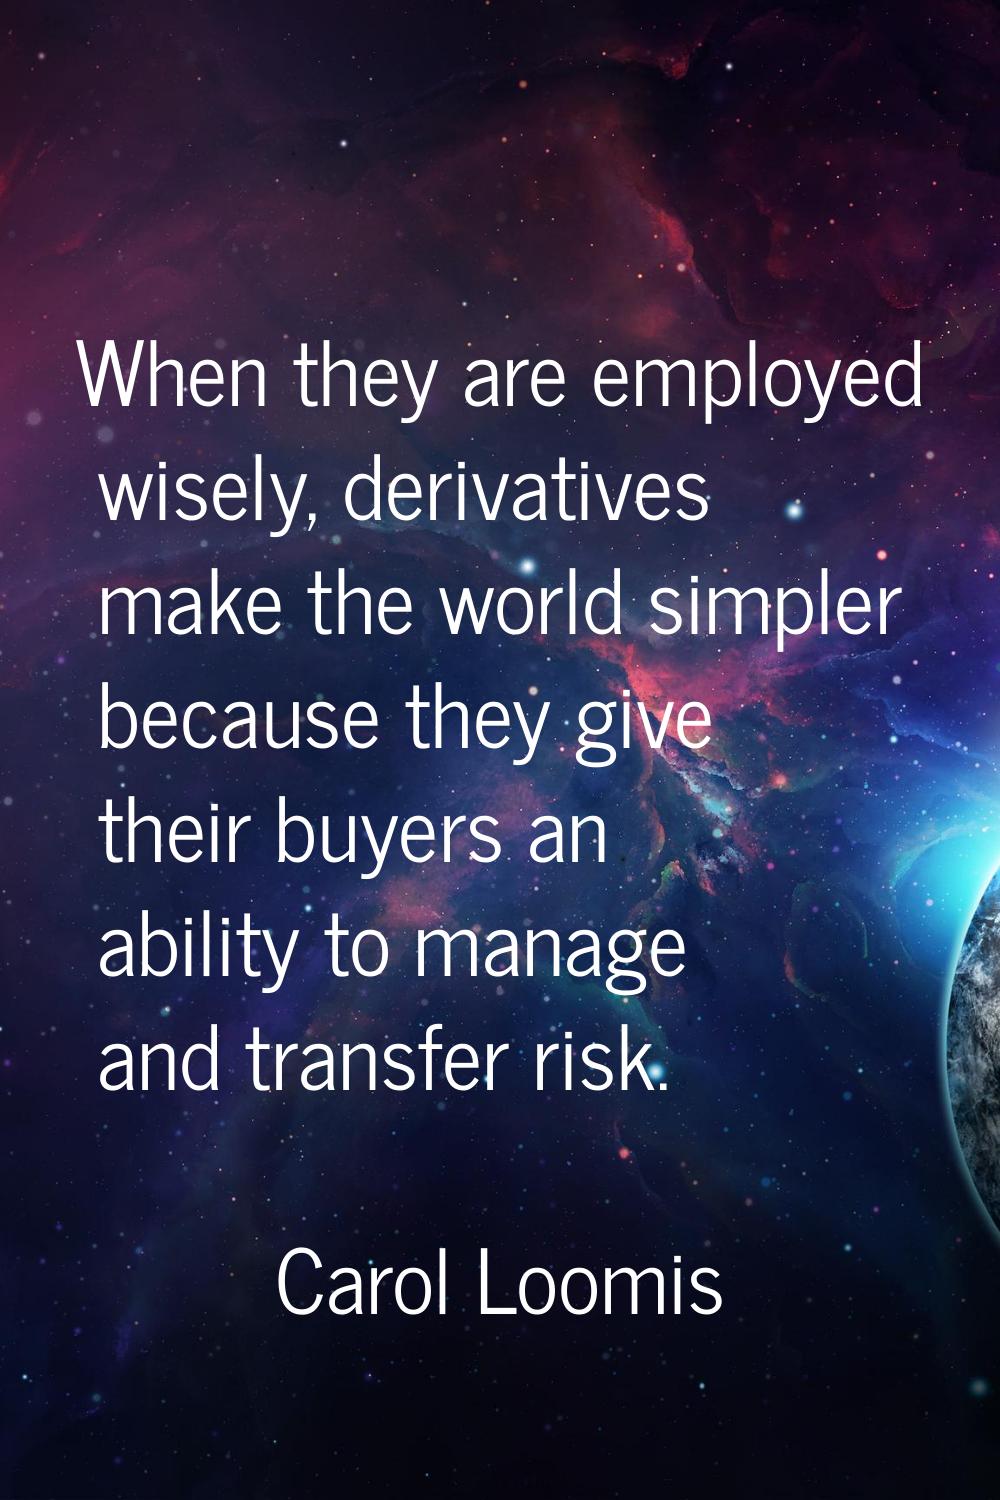 When they are employed wisely, derivatives make the world simpler because they give their buyers an